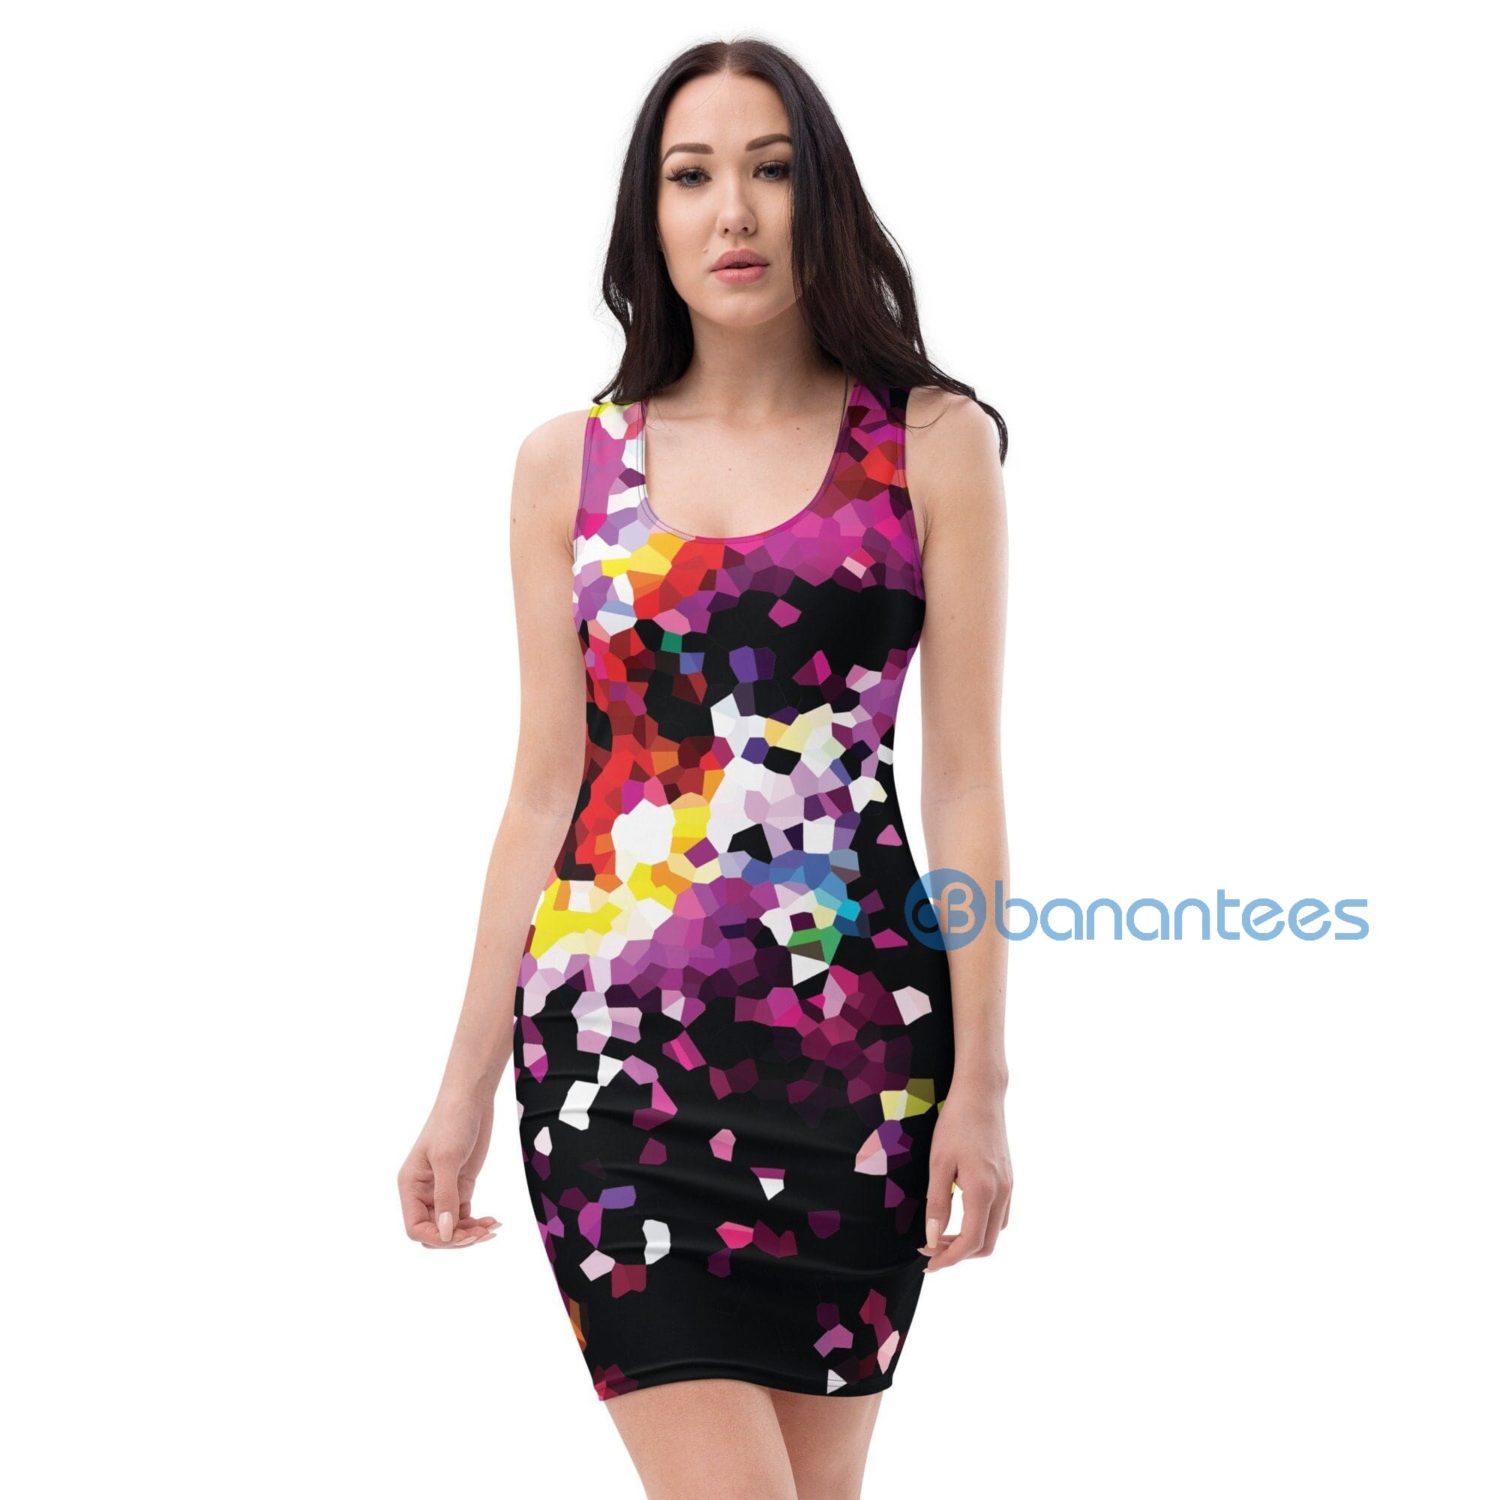 Colorful Nectar Abstract Racerback Dress For Women